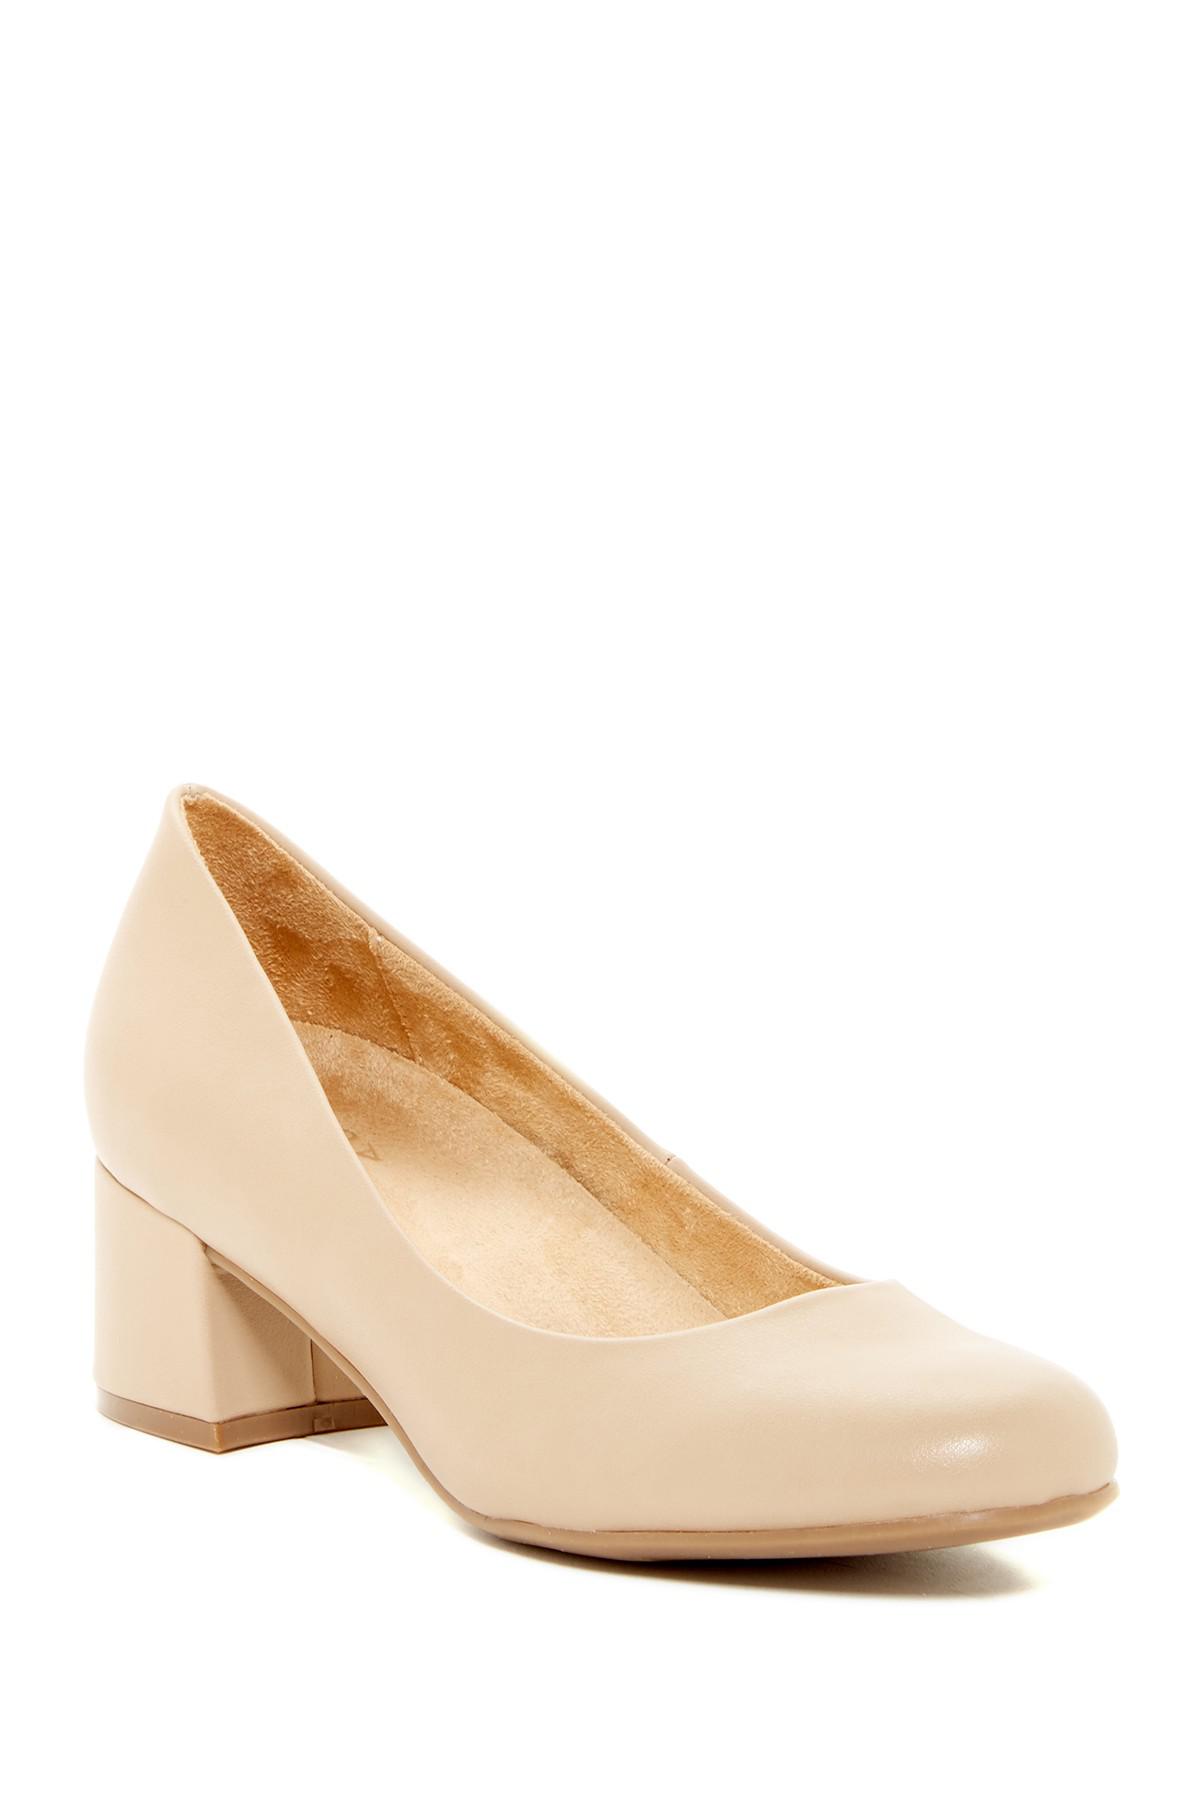 Lyst - Naturalizer Donelle Dress Pump - Wide Width Available in Natural